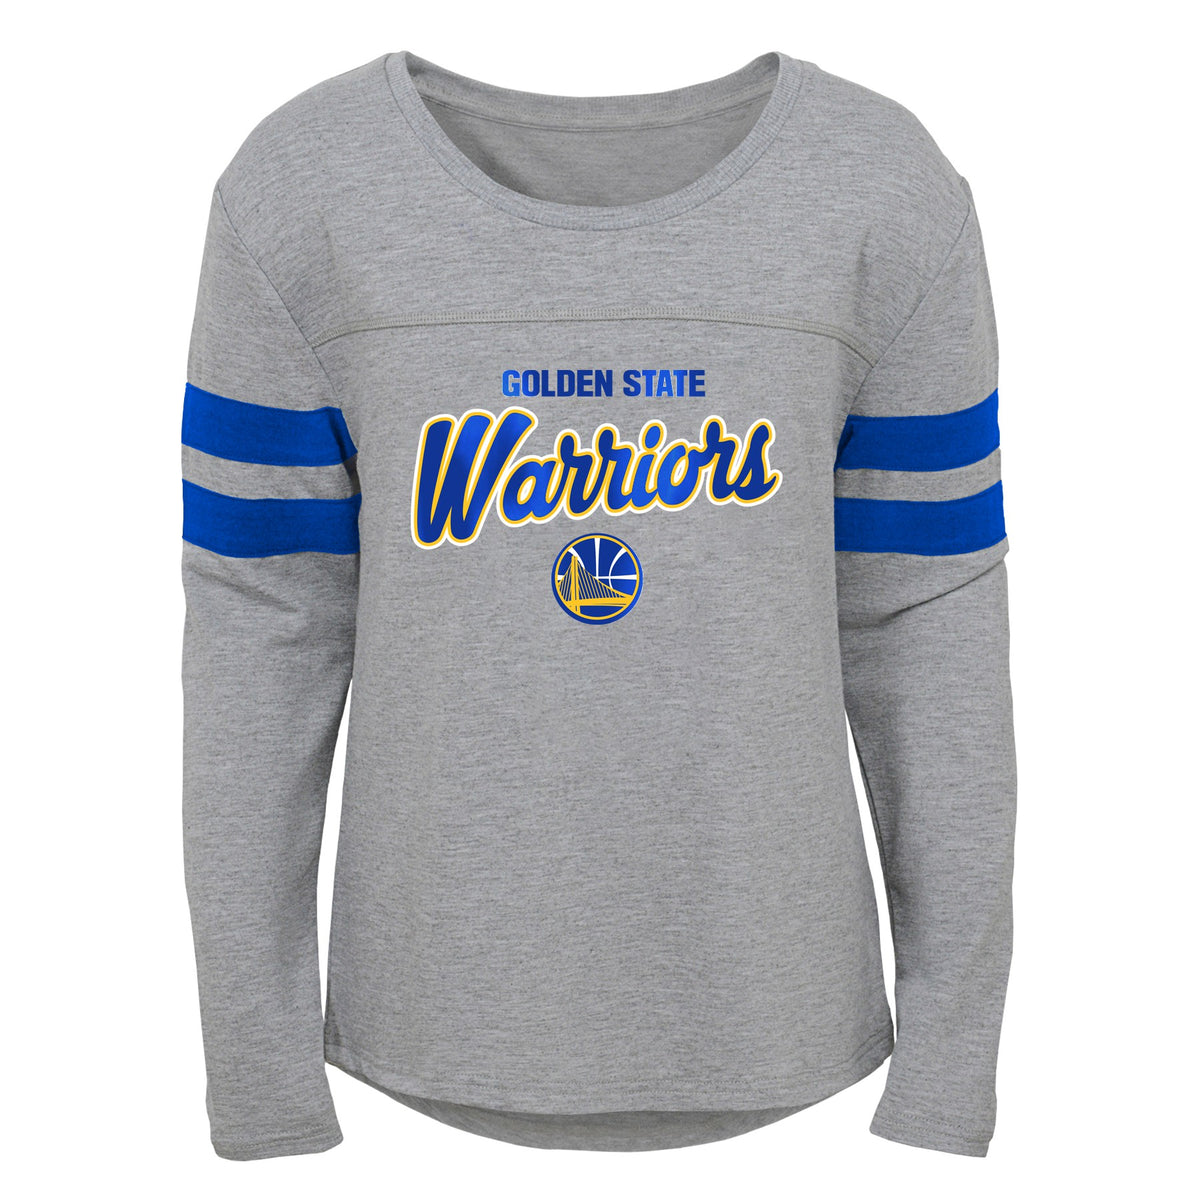 Outerstuff Nike Youth Golden State Warriors Grey Parks & Wreck Long Sleeve T-Shirt, Boys', Small, Gray